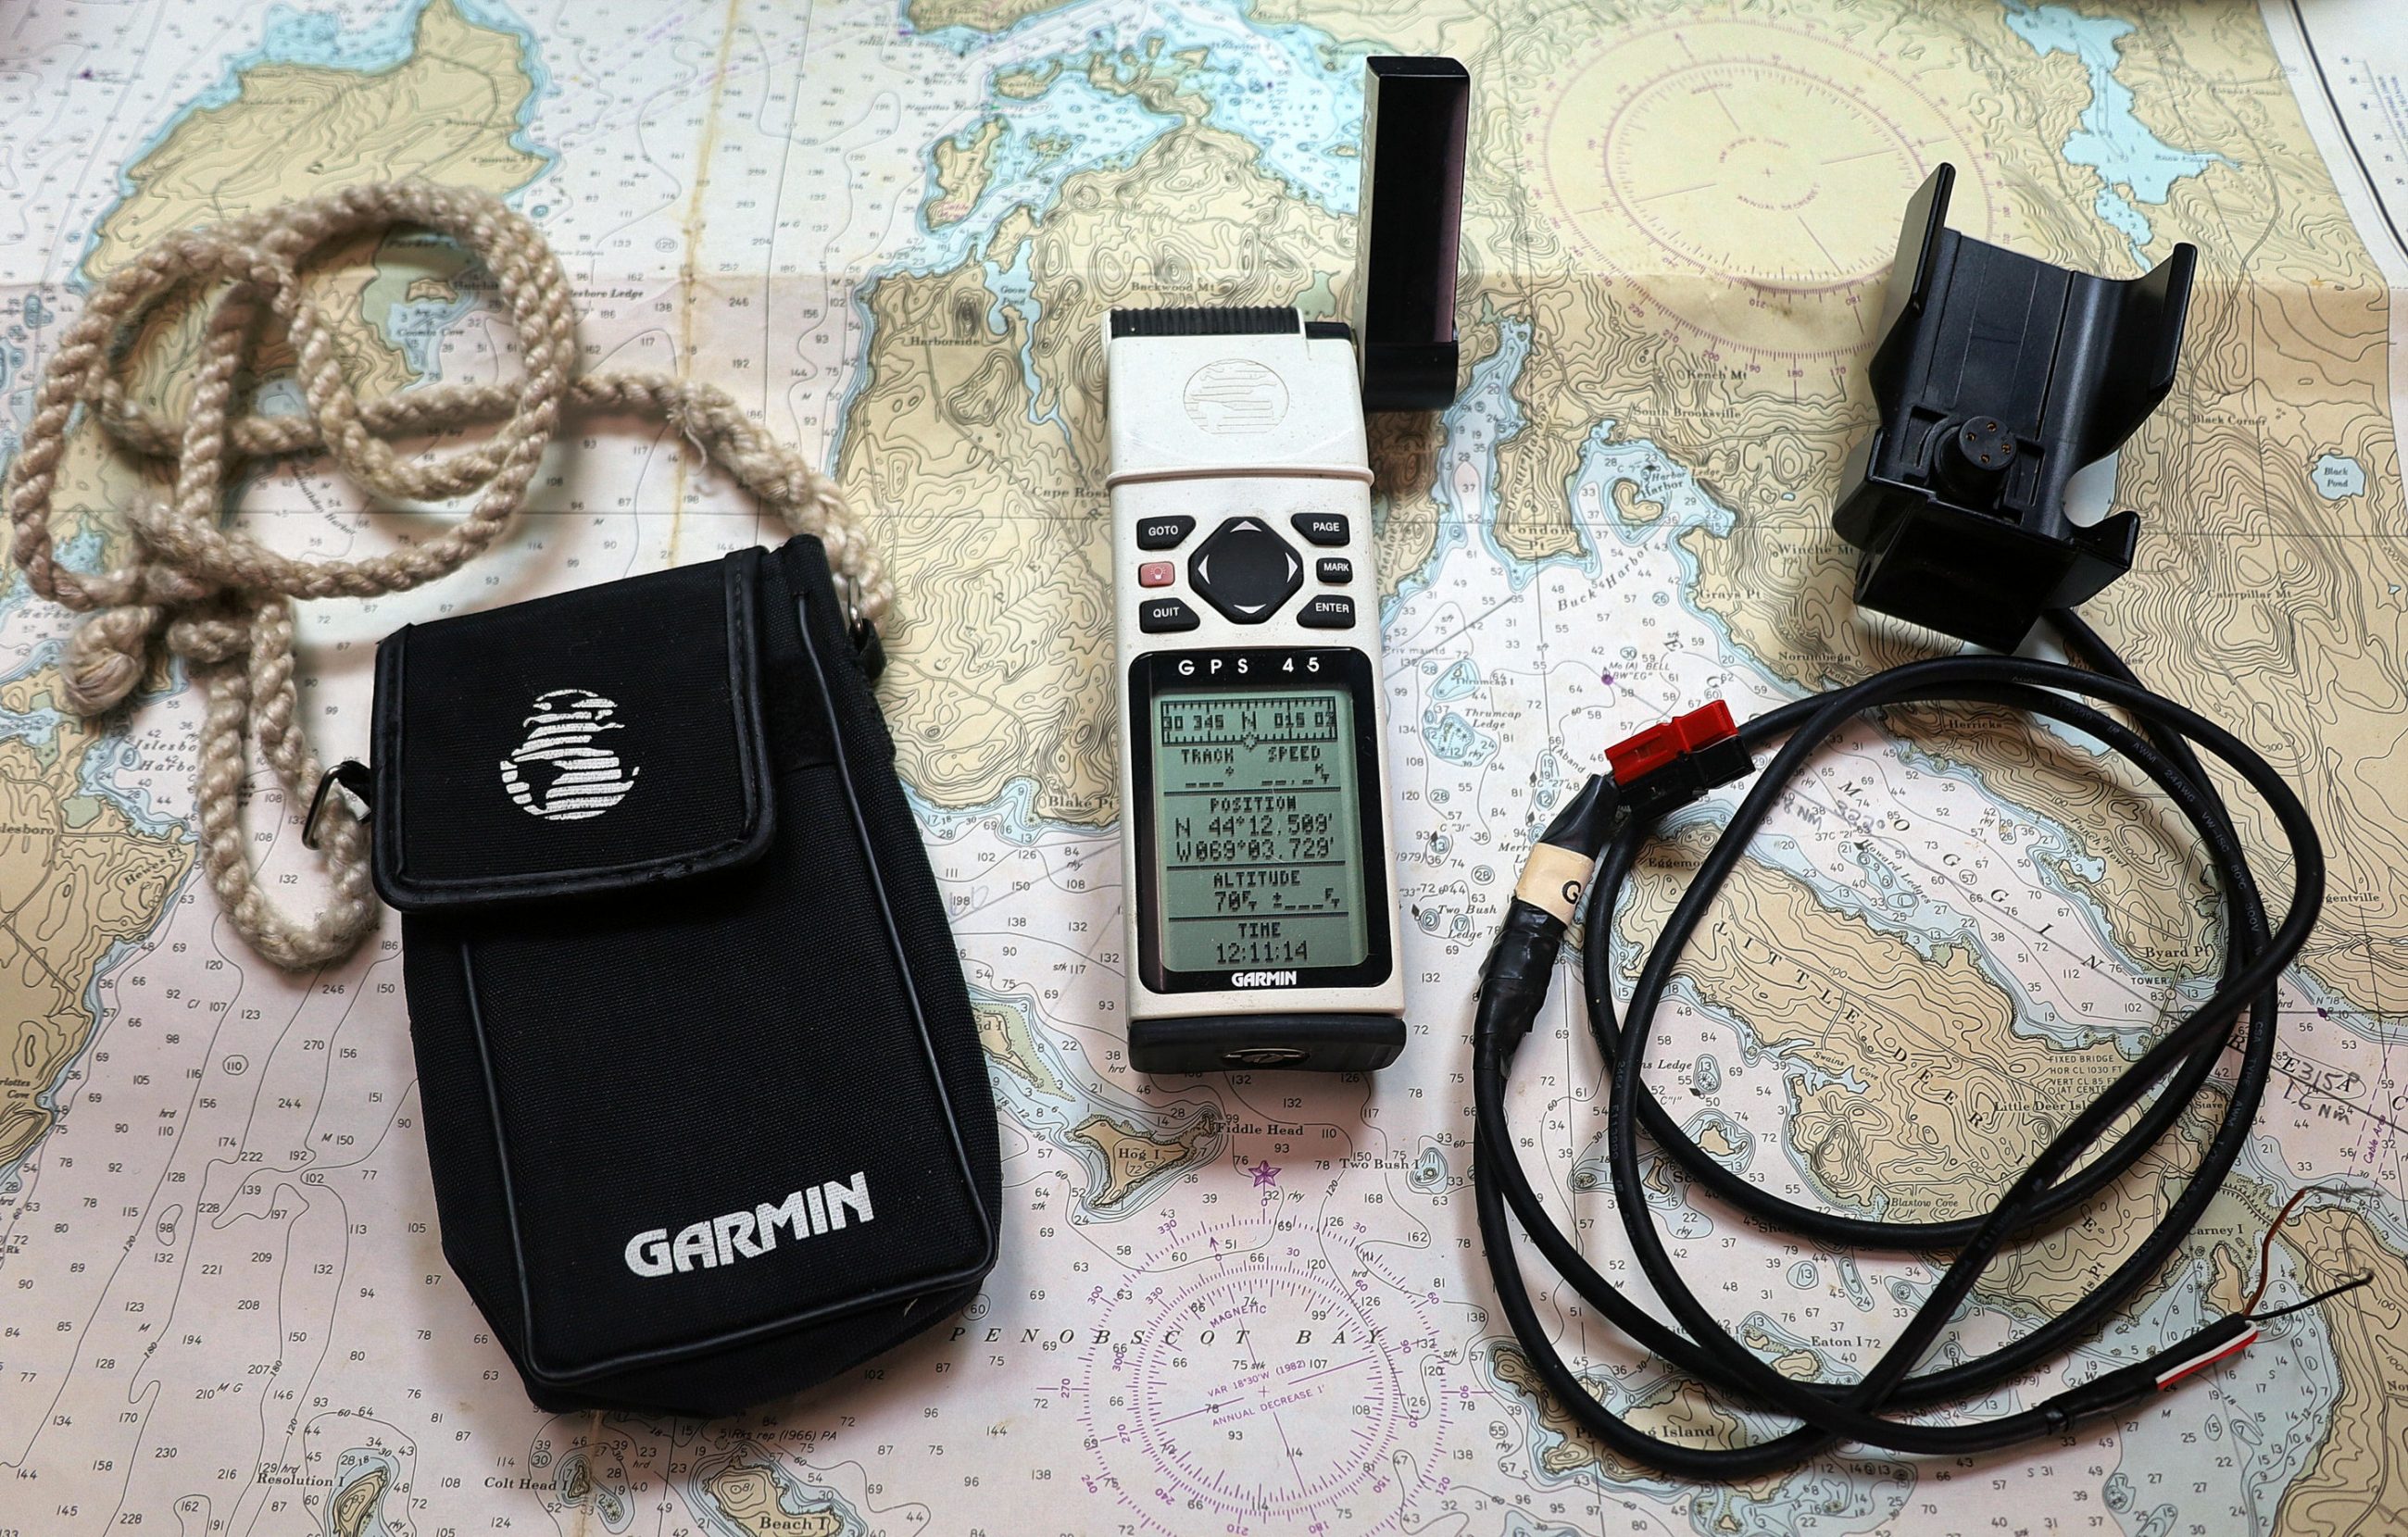 svinge syg accelerator My Garmin GPS 45 was amazing in 1994, and it still works (mostly) - Panbo